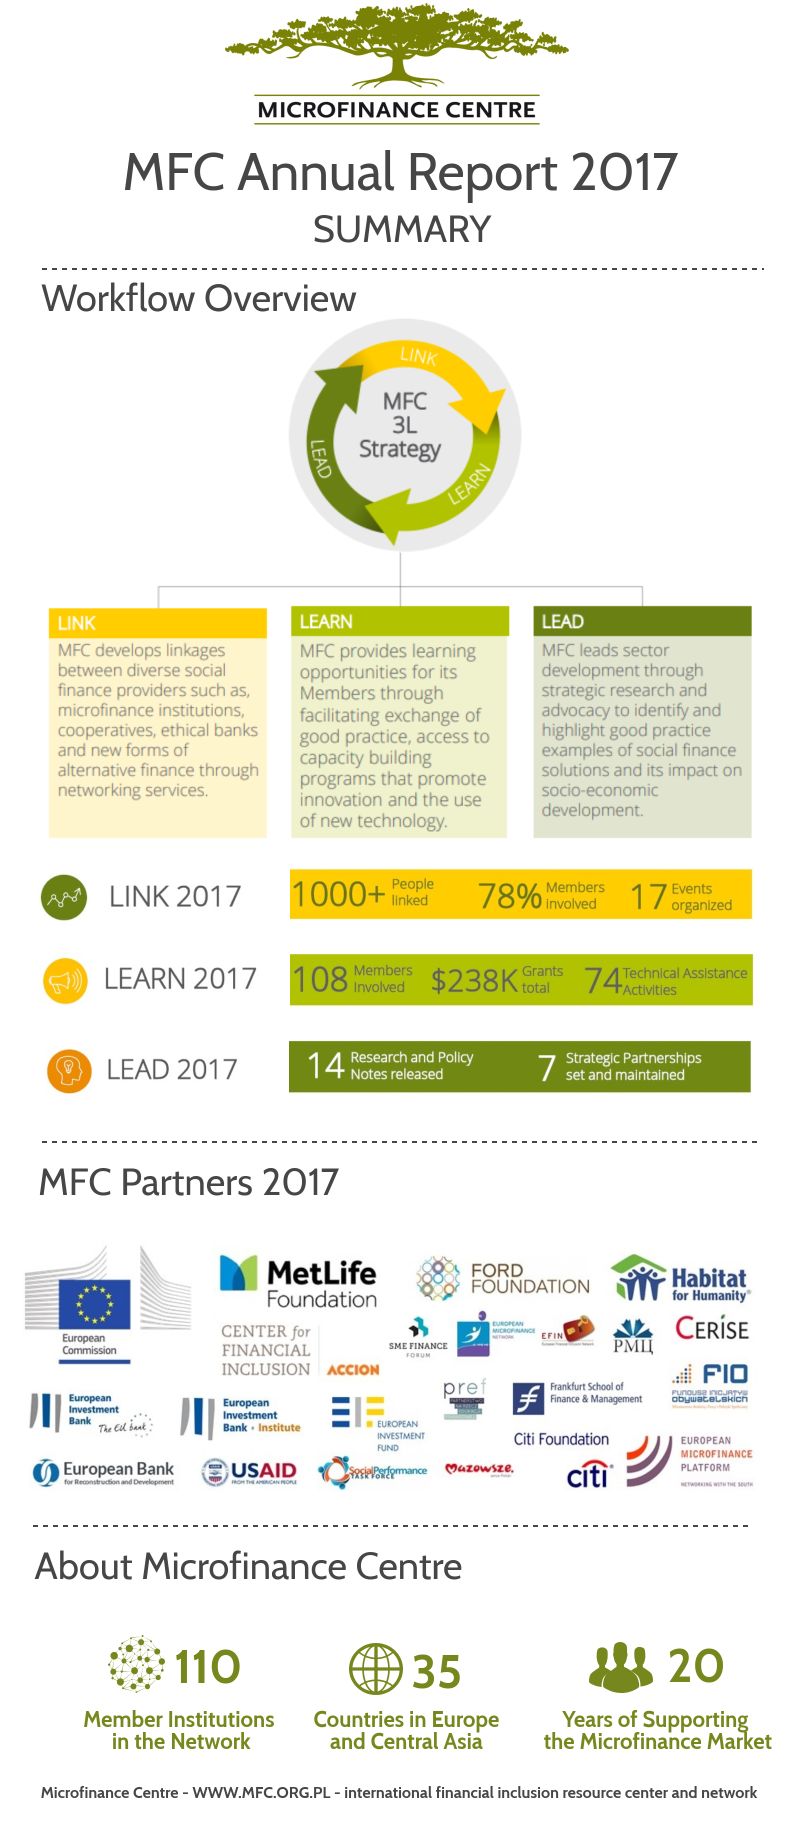 MFC Annual Report 2017 summary infographic